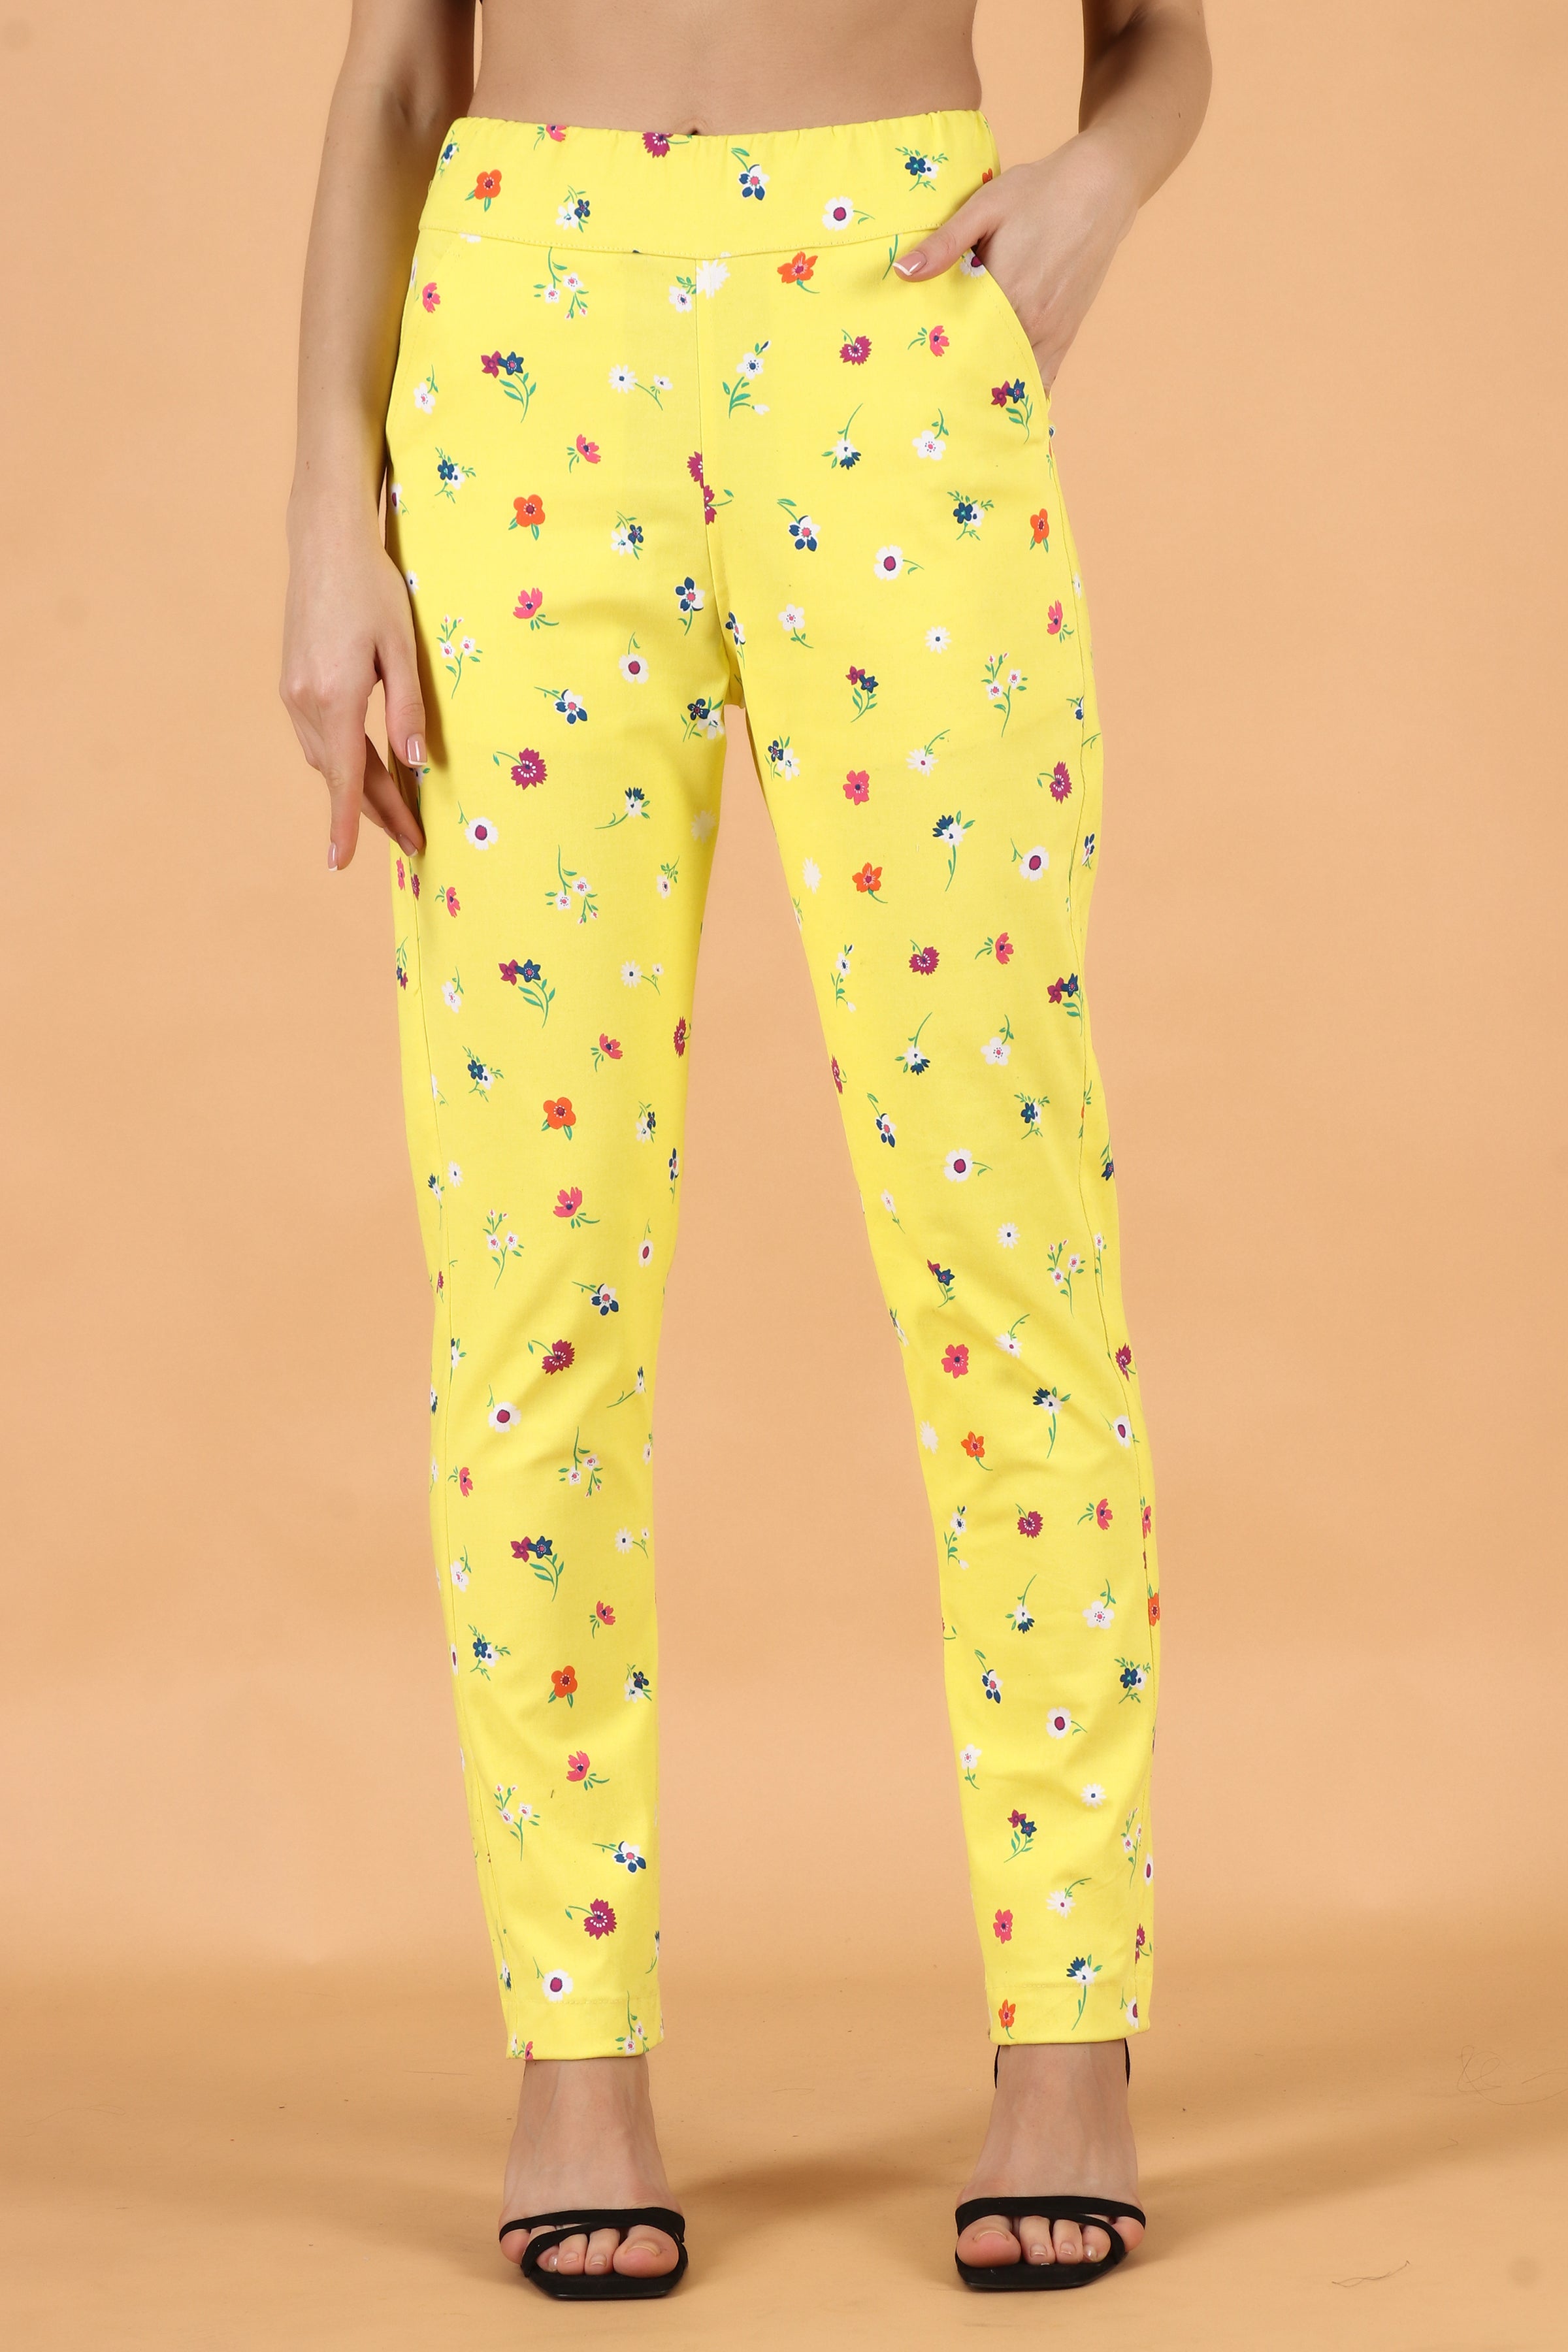 AND Multicolor Floral Print Pants